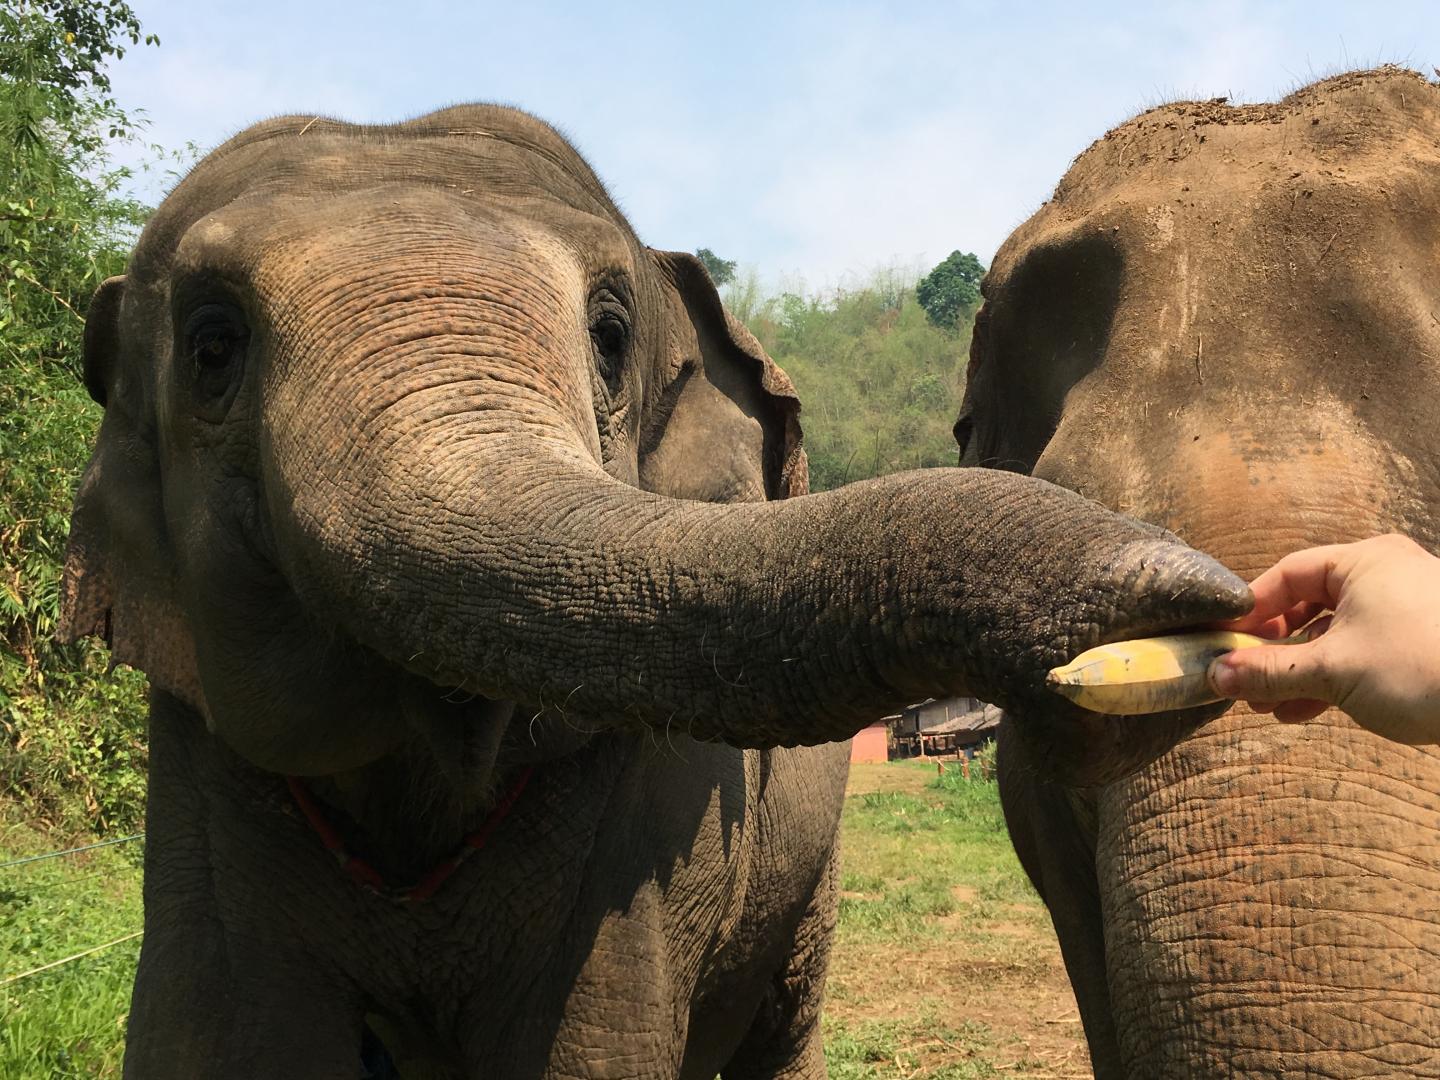 An Elephant (Or Elephants) at the Golden Triangle Asian Elephant Foundation in Chiang Rai, Thailand